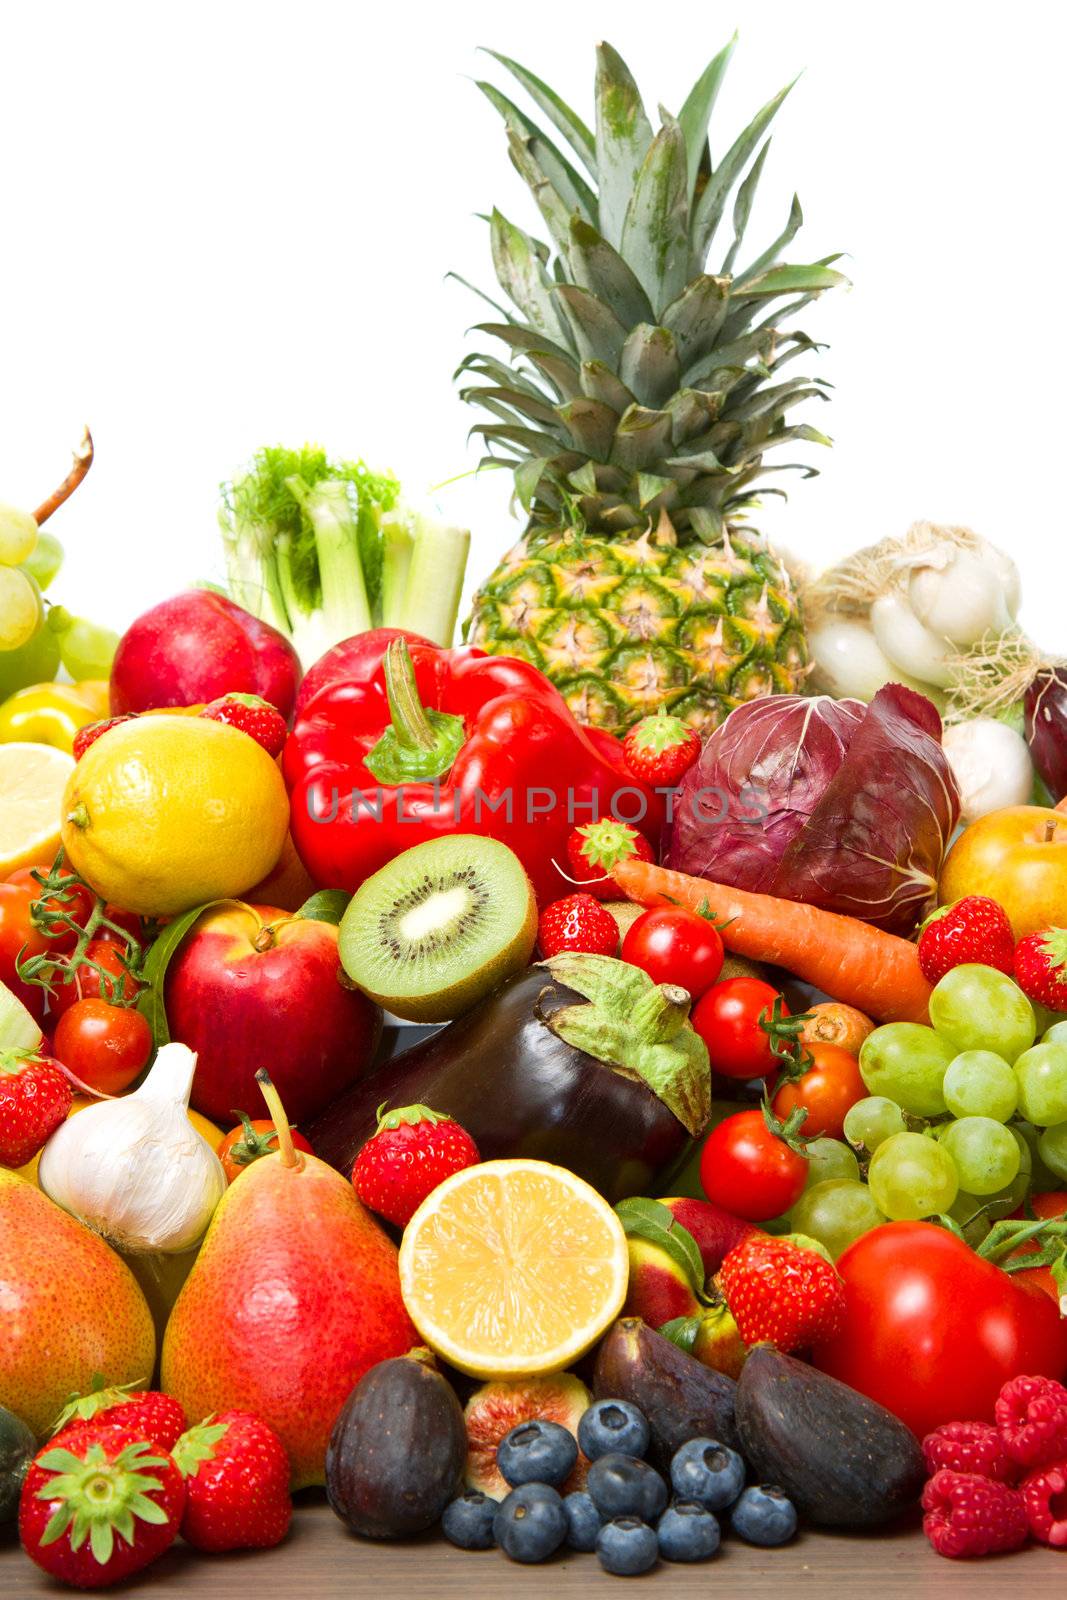 Fruits and vegetables like tomatoes, zucchini, melons, bananas and grapes arranged in a group, natural still life for healthy food 